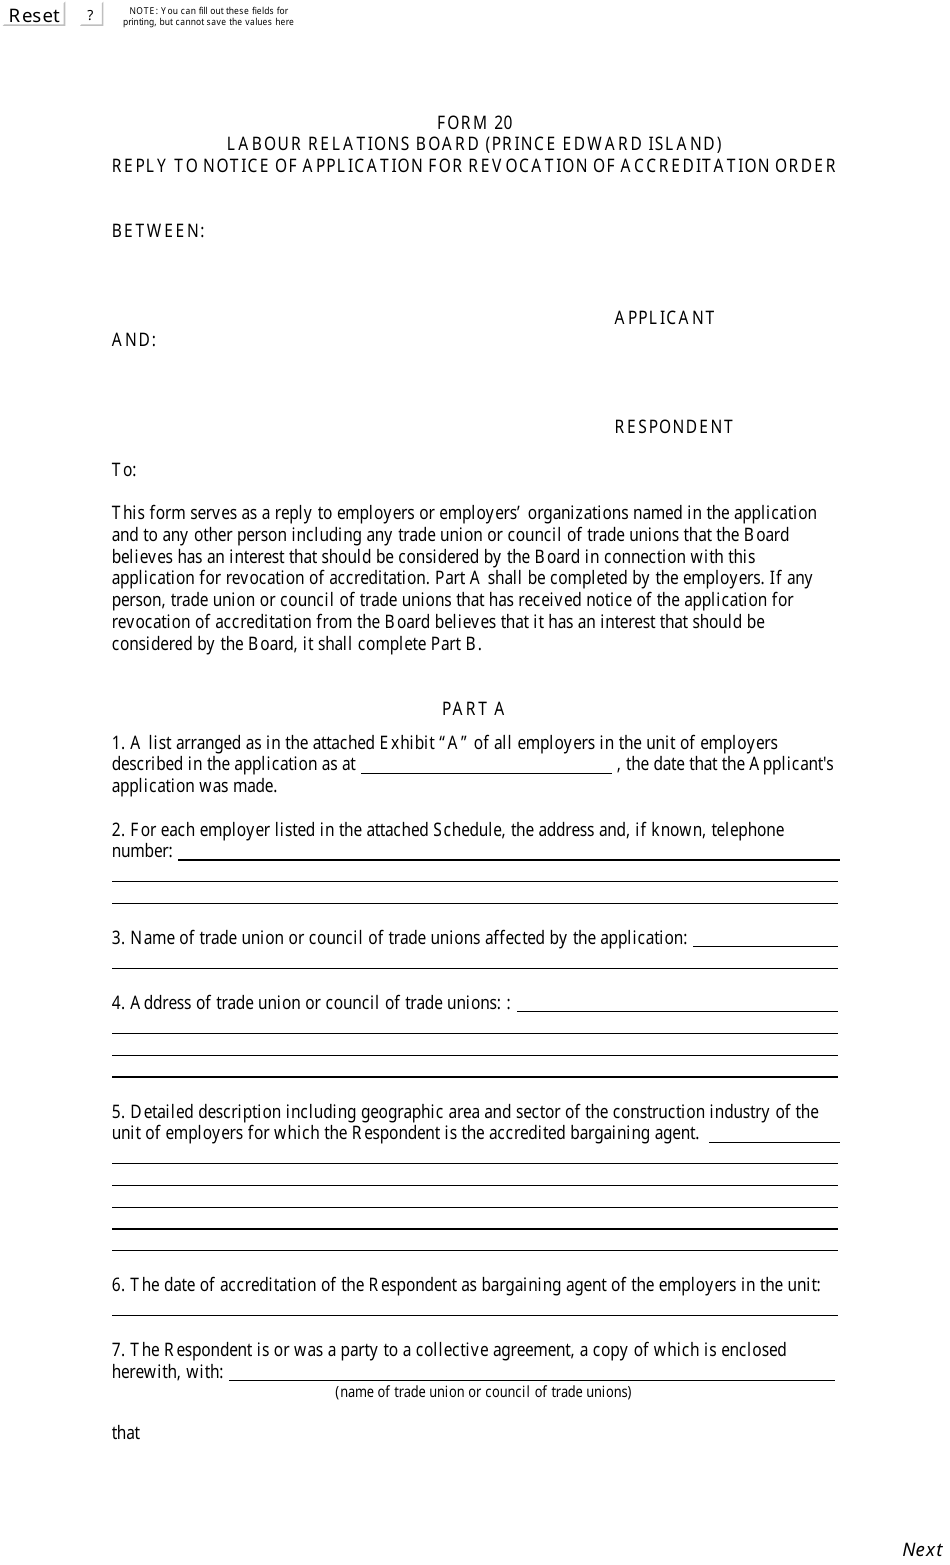 Form 20 Reply to Notice of Application for Revocation of Accreditation Order - Prince Edward Island, Canada, Page 1